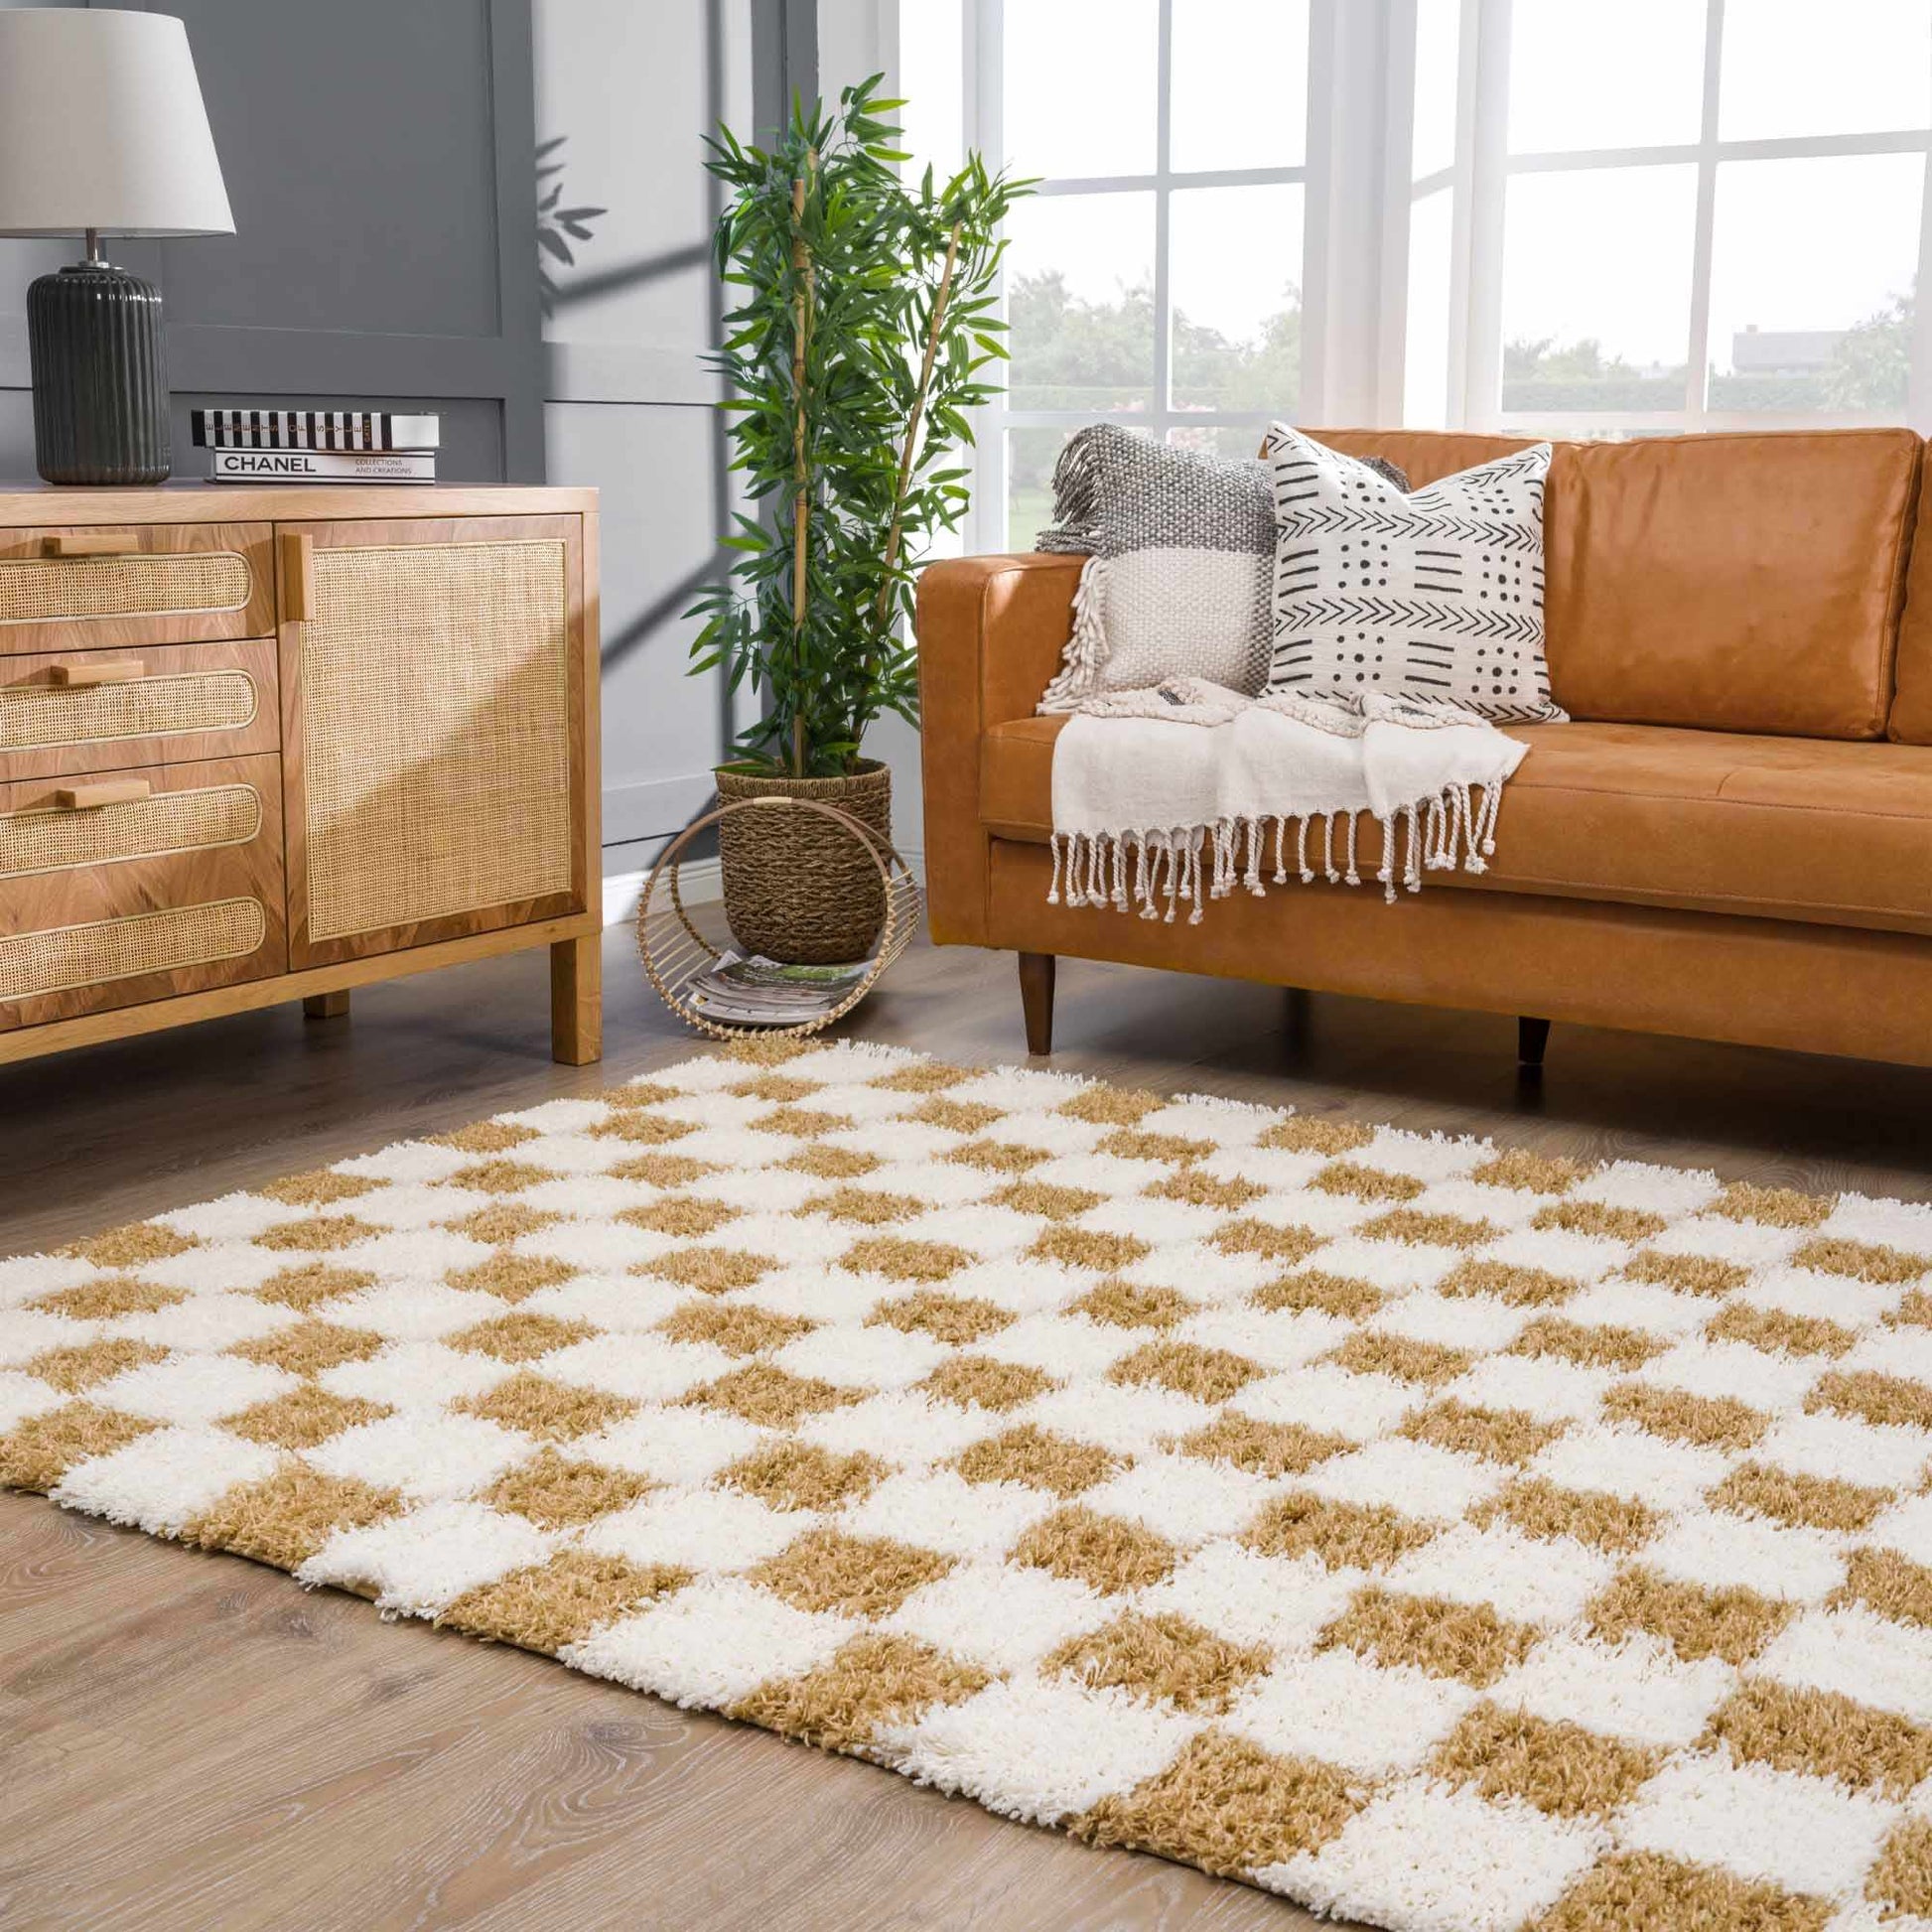 Boutique Rugs Rugs 5'3" x 7'3" Rectangle Atira Mustard Checkered Area Rug